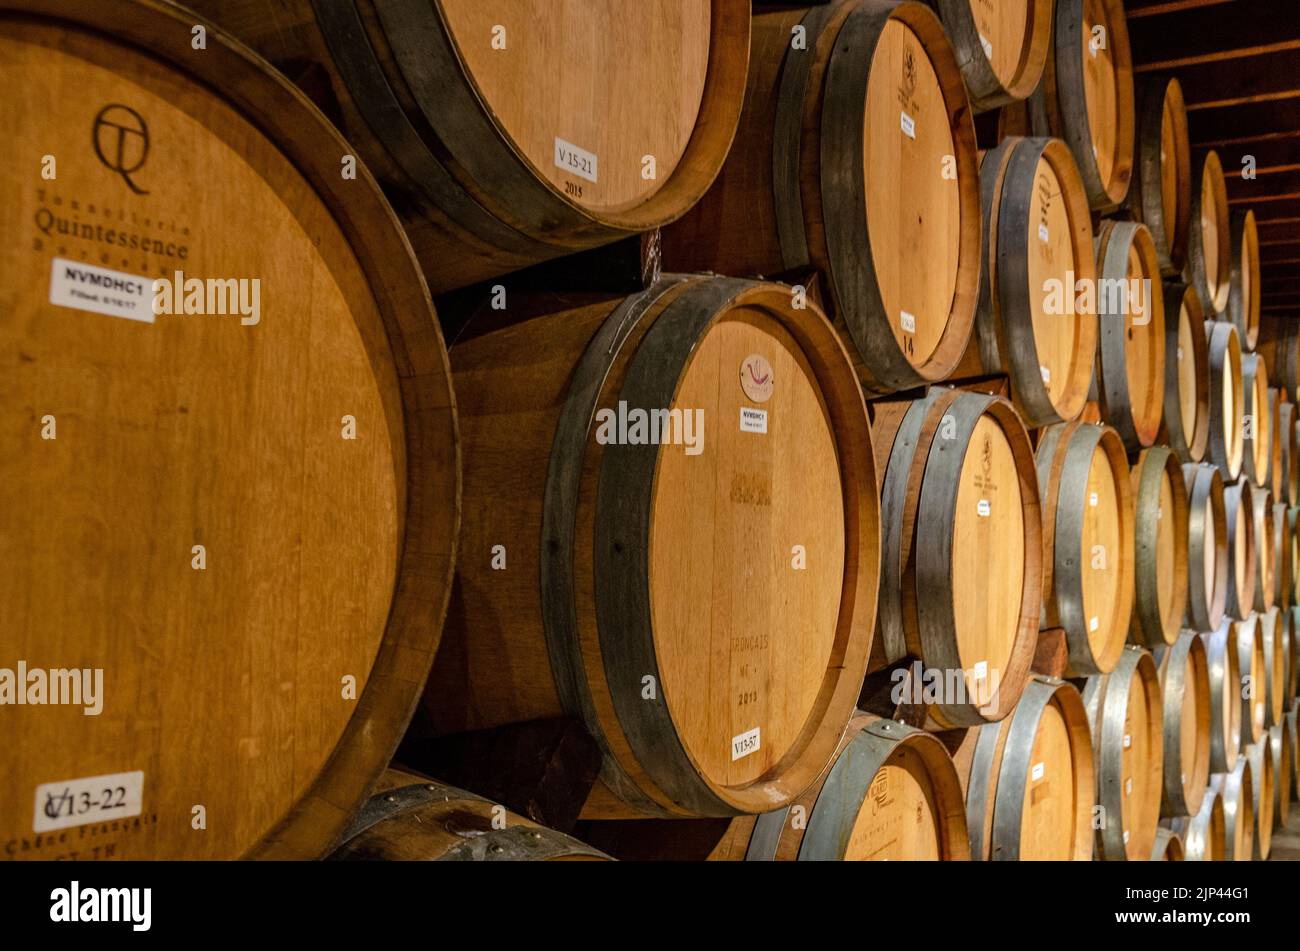 Oak barrels filled with ageing wine at a winery in The Napa Valley, California, USA Stock Photo